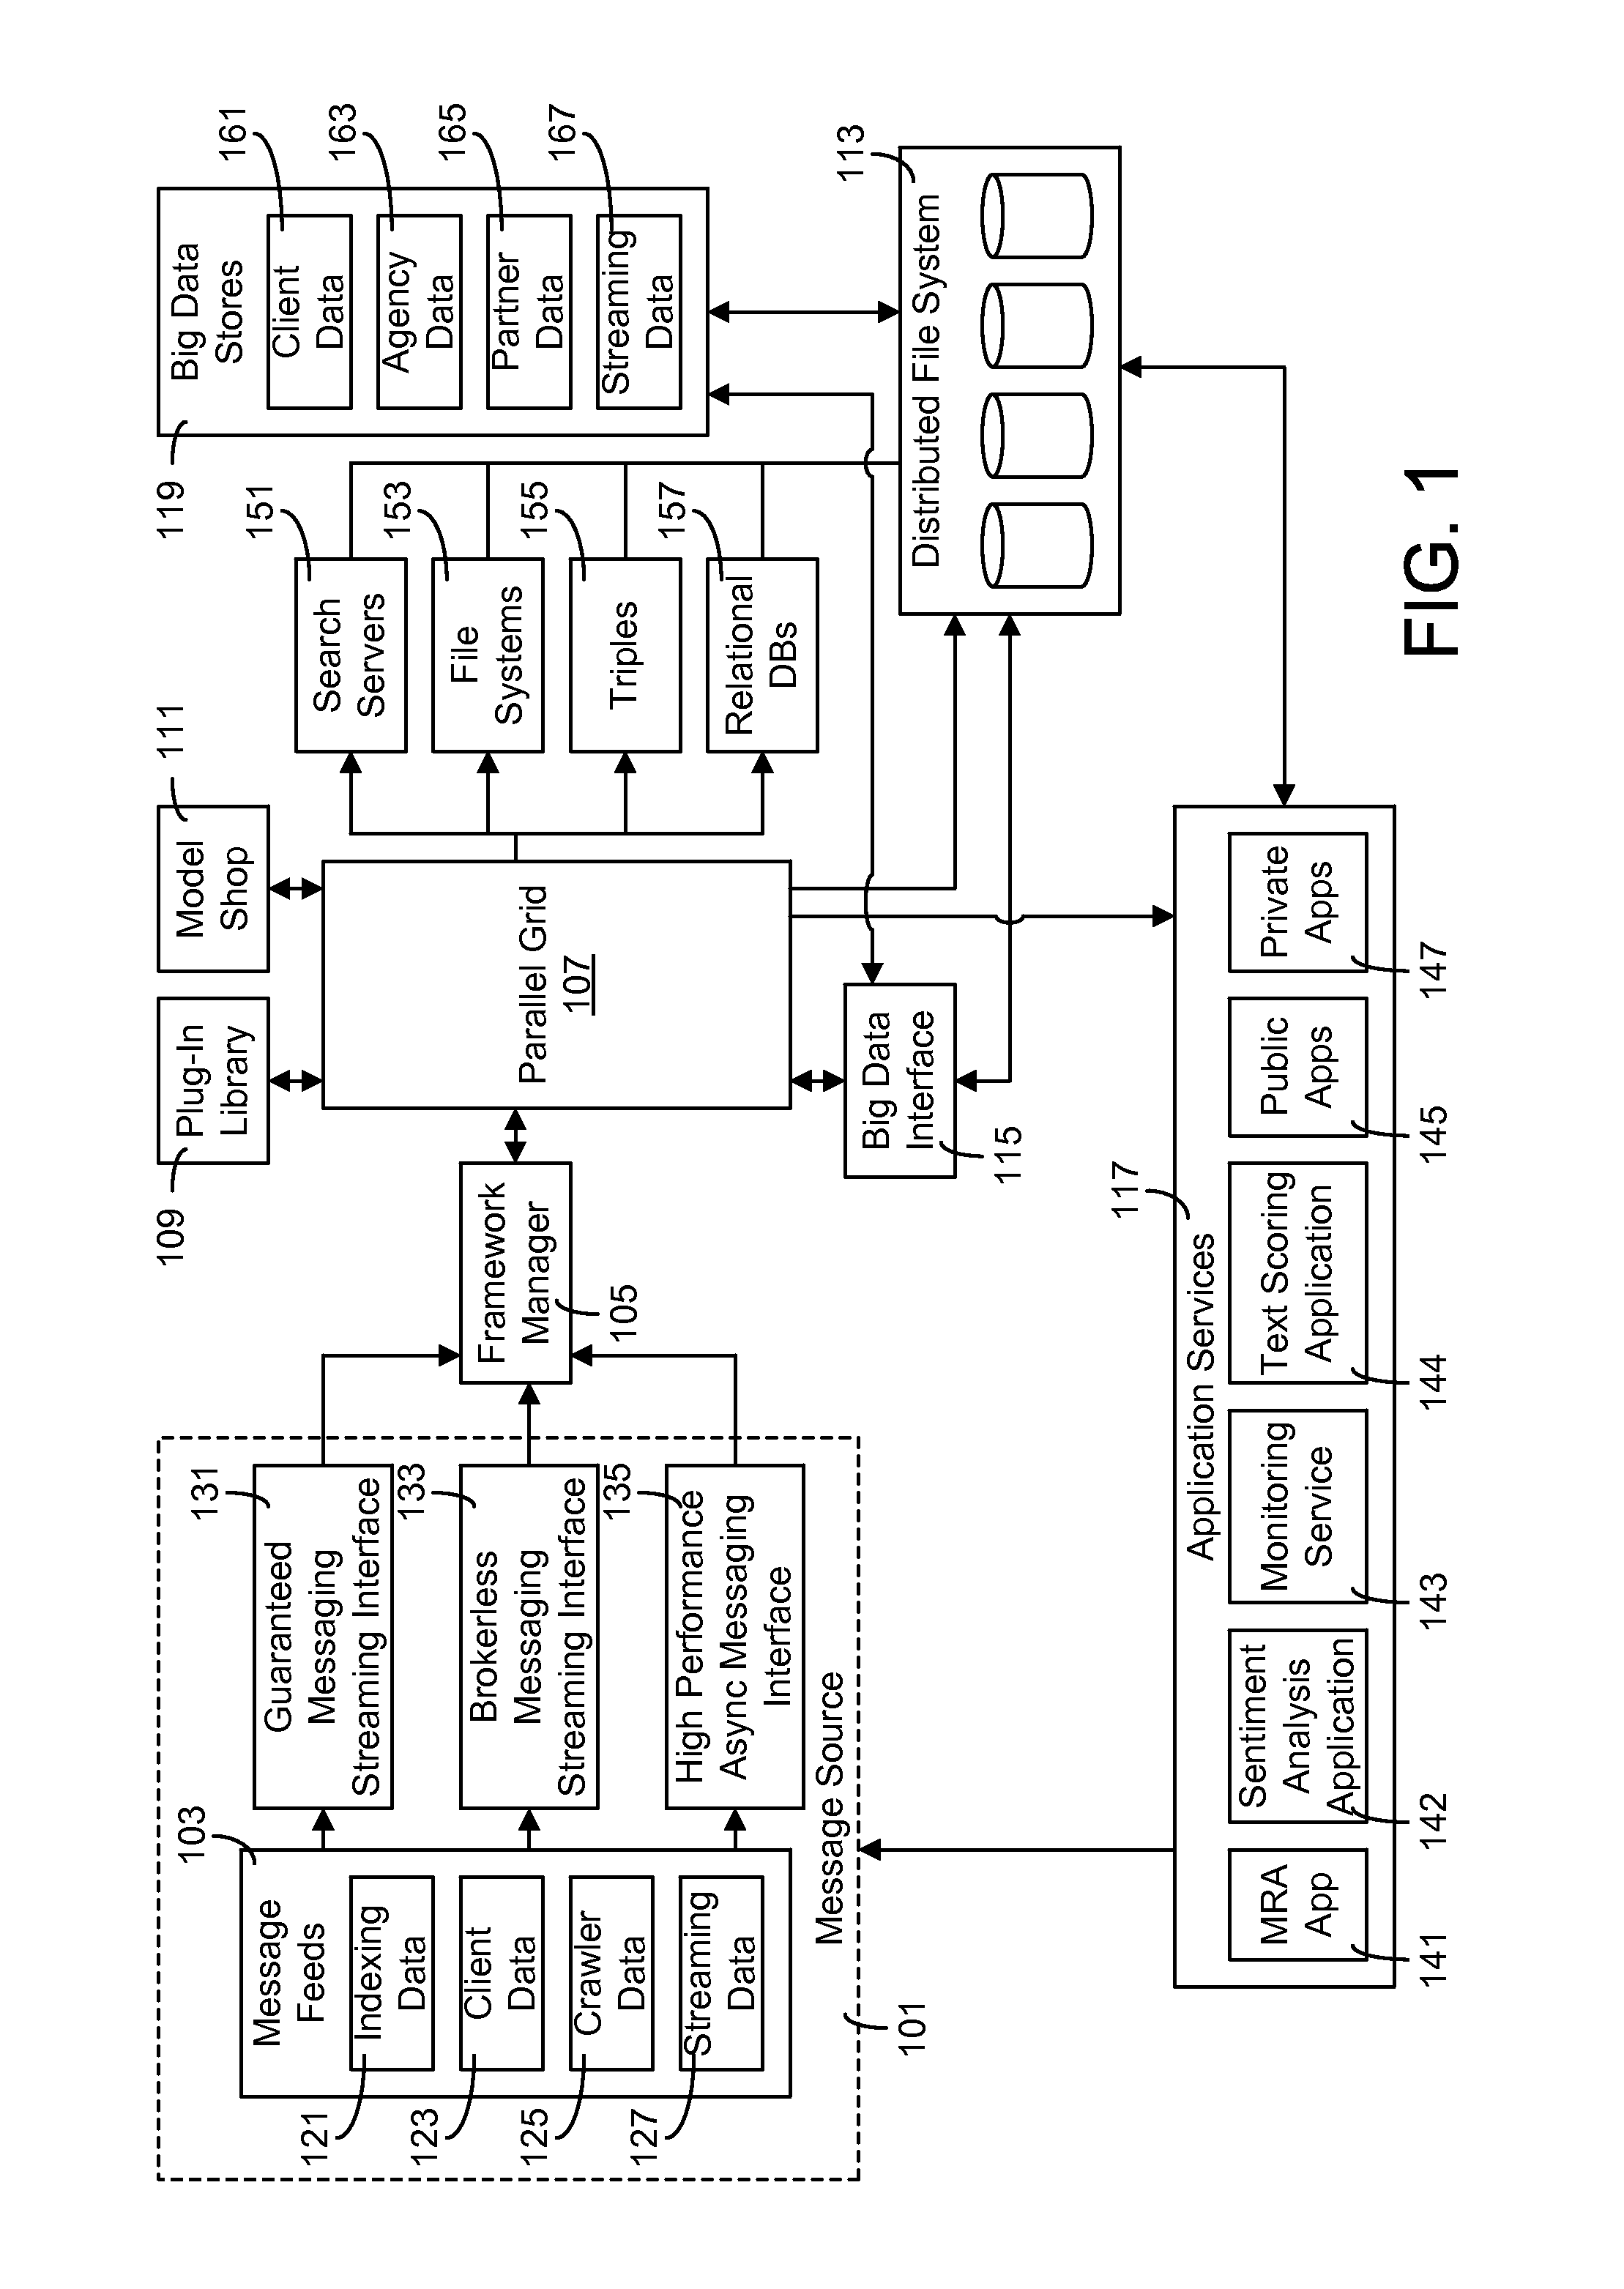 Emotion processing systems and methods